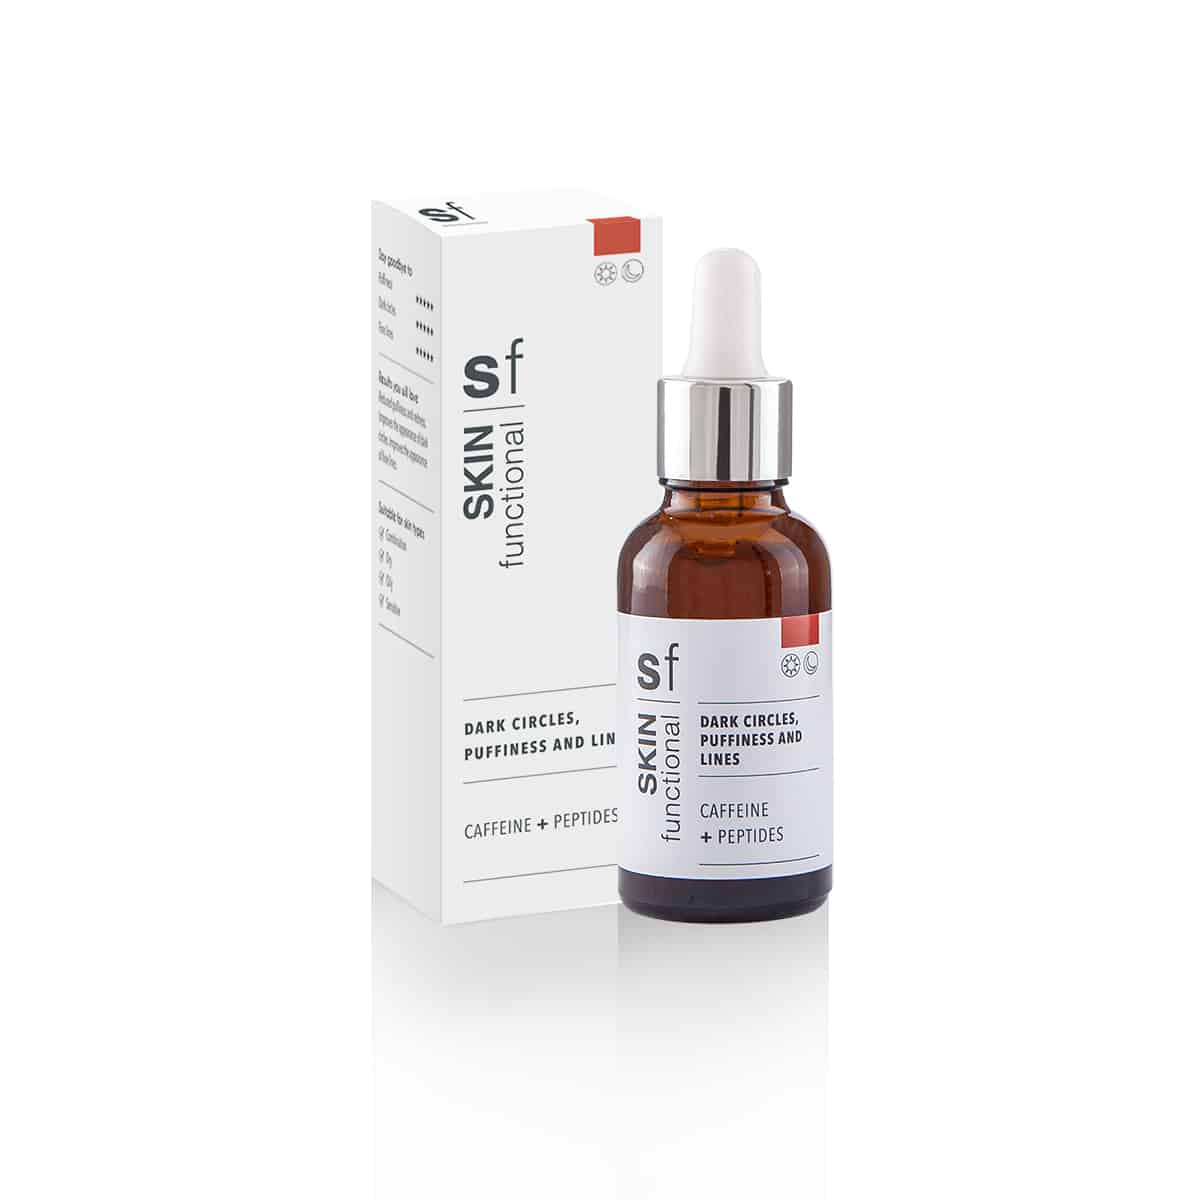 A bottle of SKIN Functional - Caffeine + Peptides - Dark Circles, Puffiness and Lines with a box next to it, designed to target dark circles, puffiness, and lines.